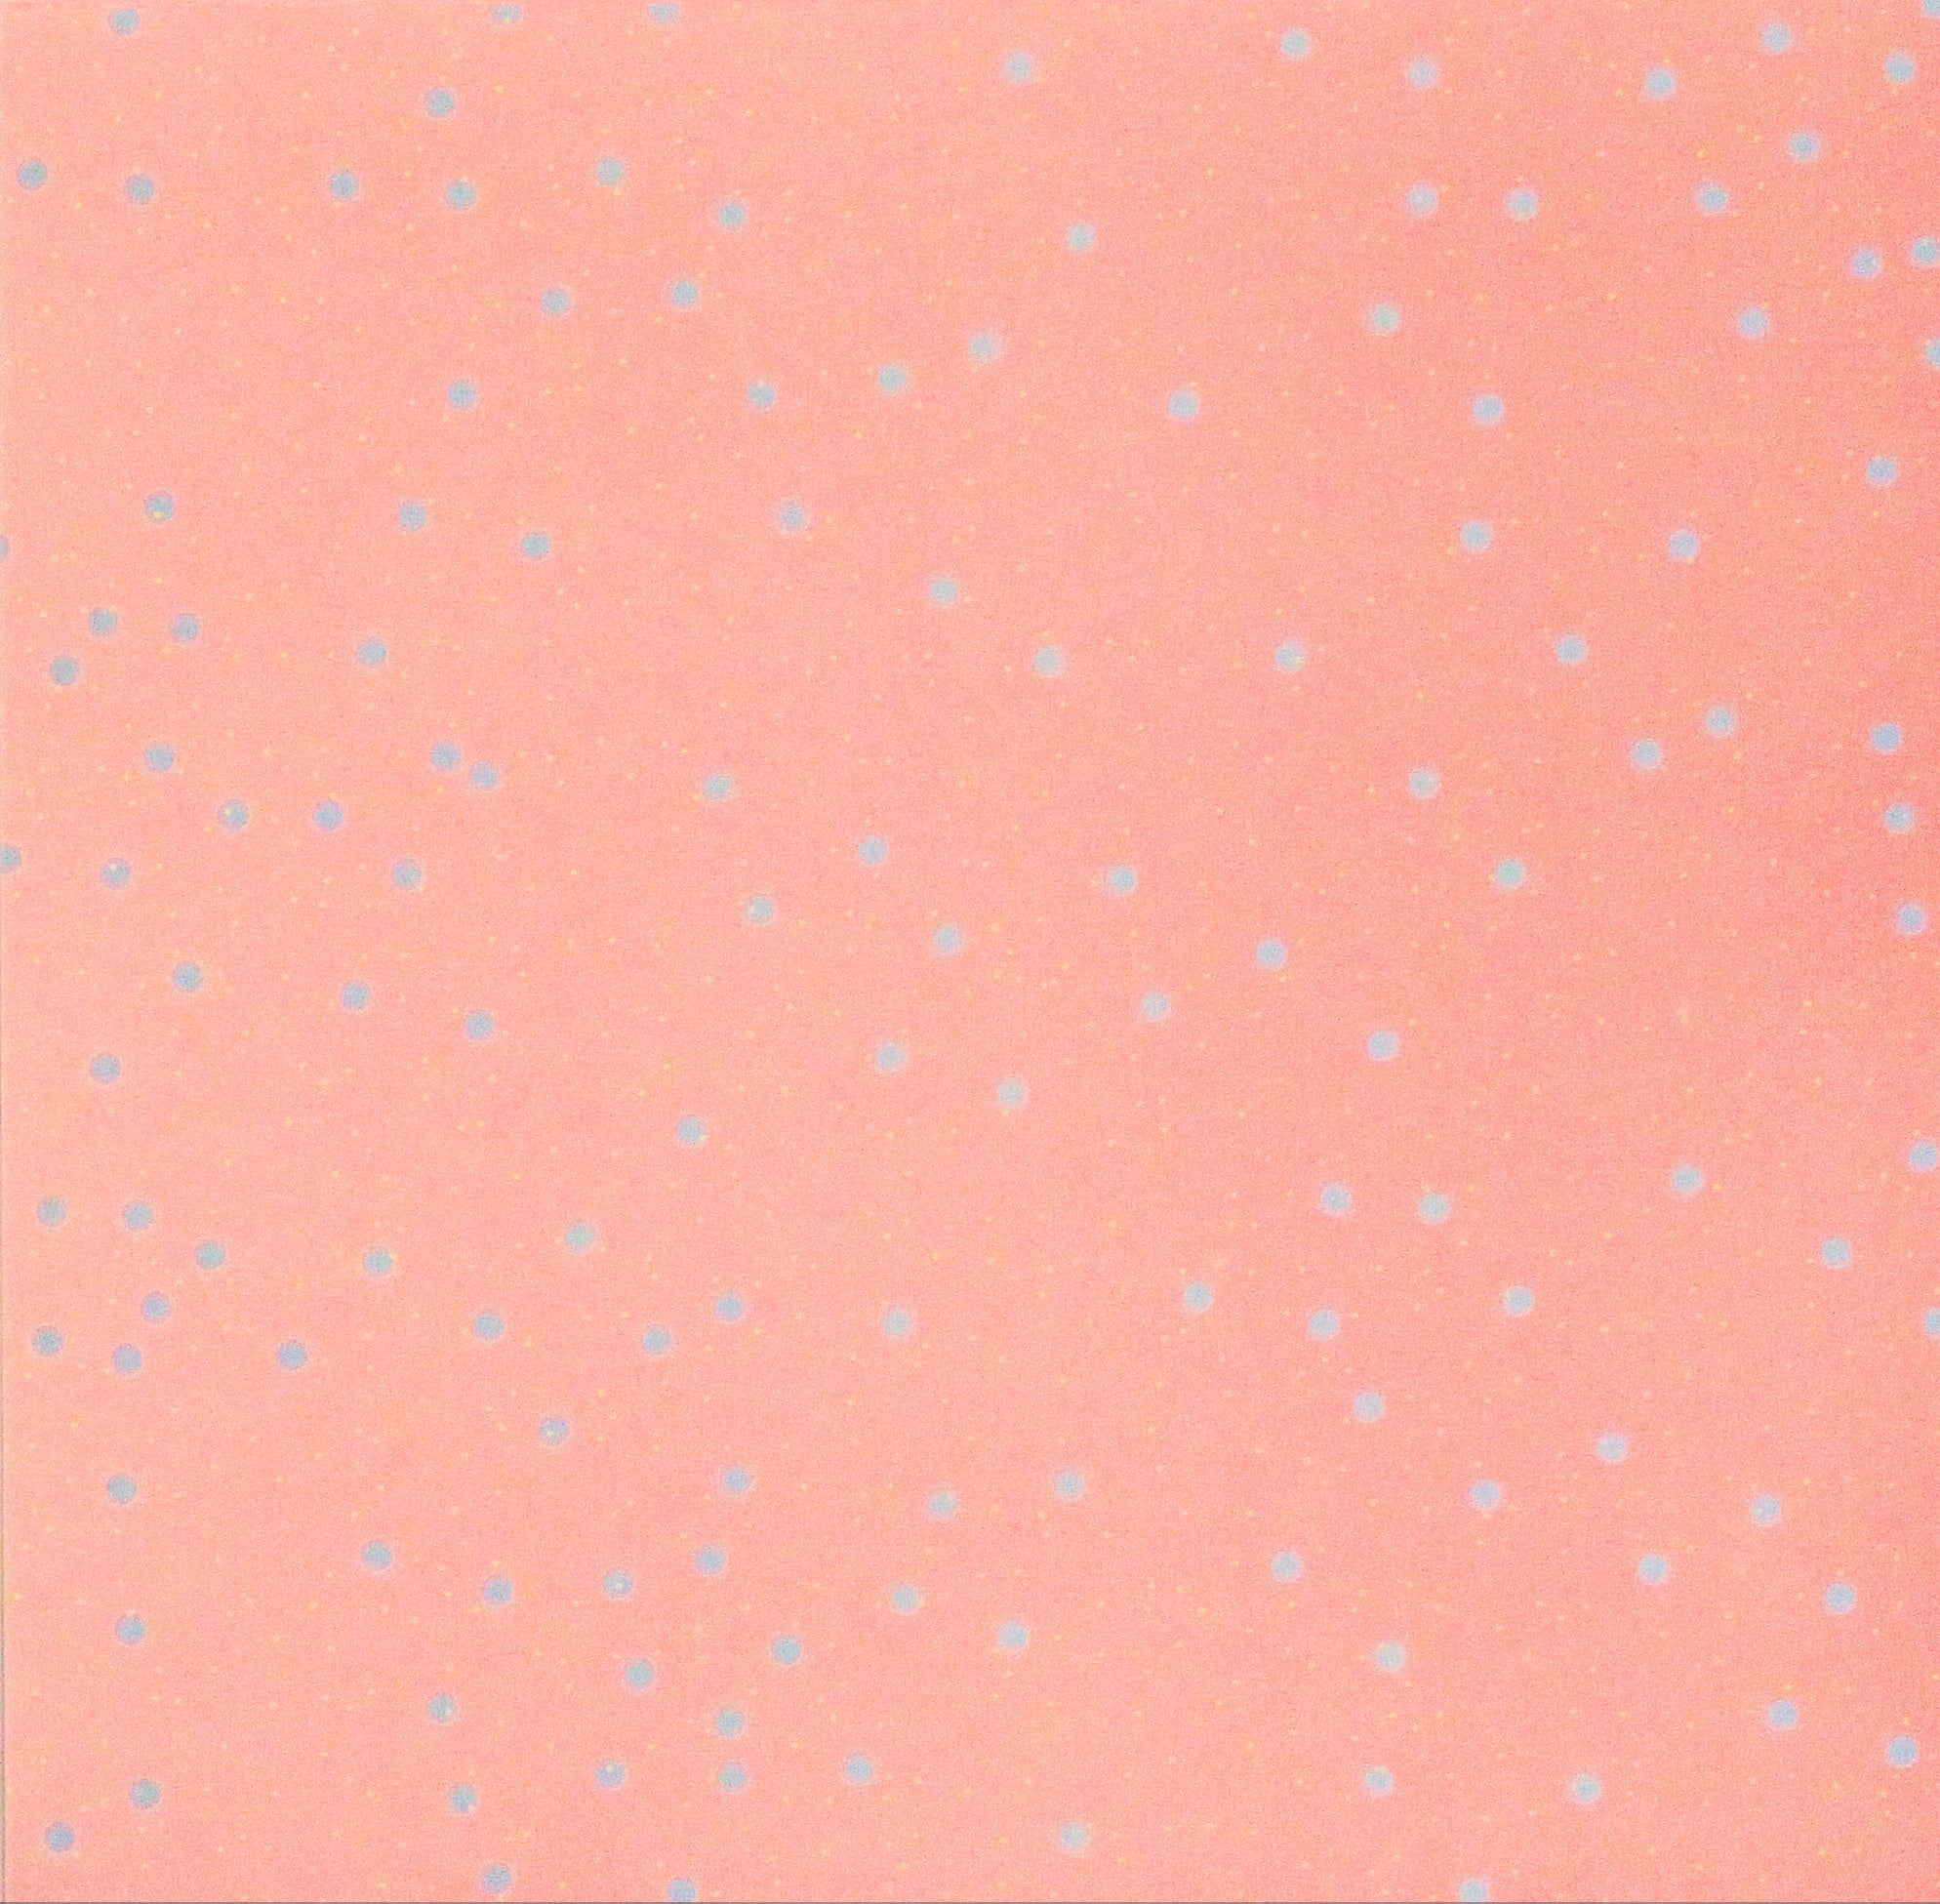 DCWV Easter Blue and White Dots 12 x 12 Flat Scrapbook Paper